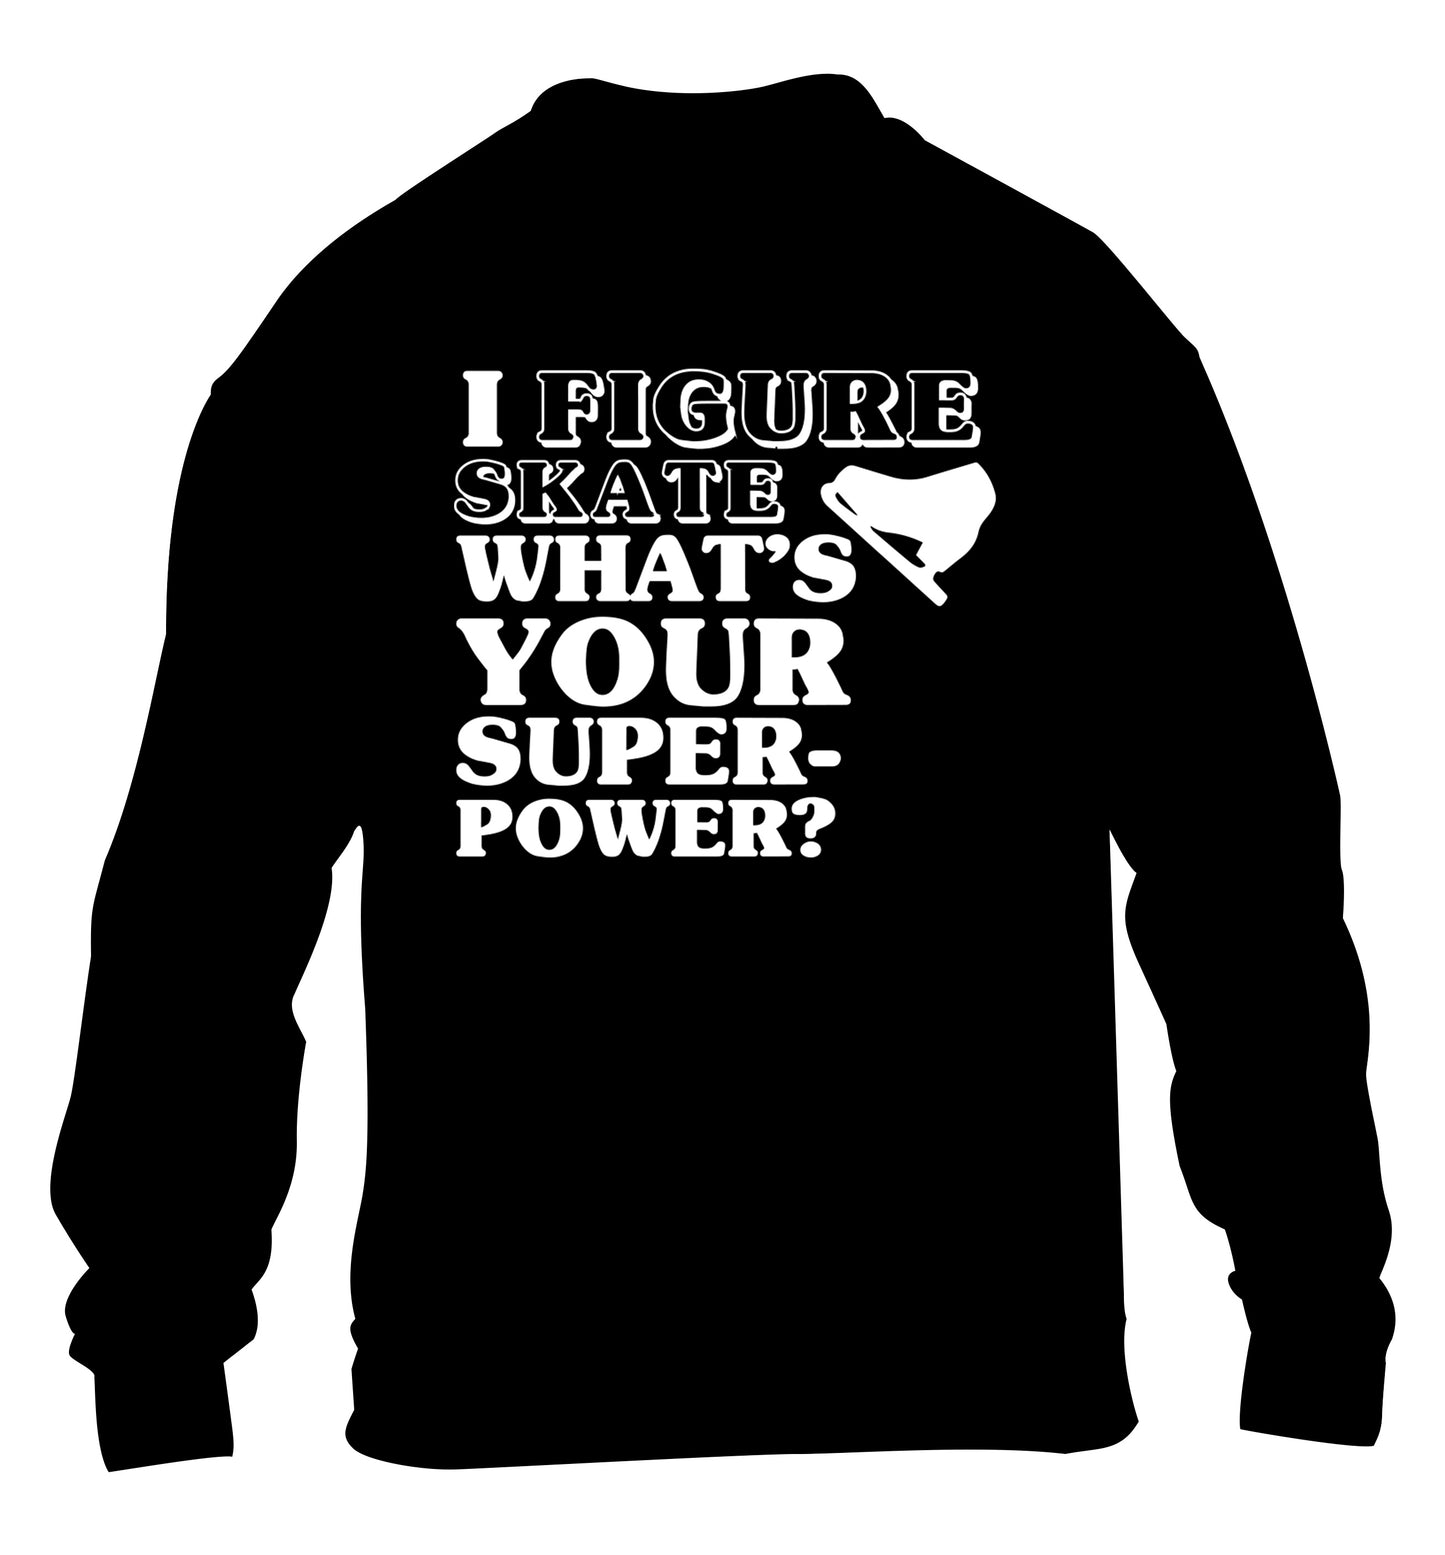 I figure skate what's your superpower? children's black sweater 12-14 Years